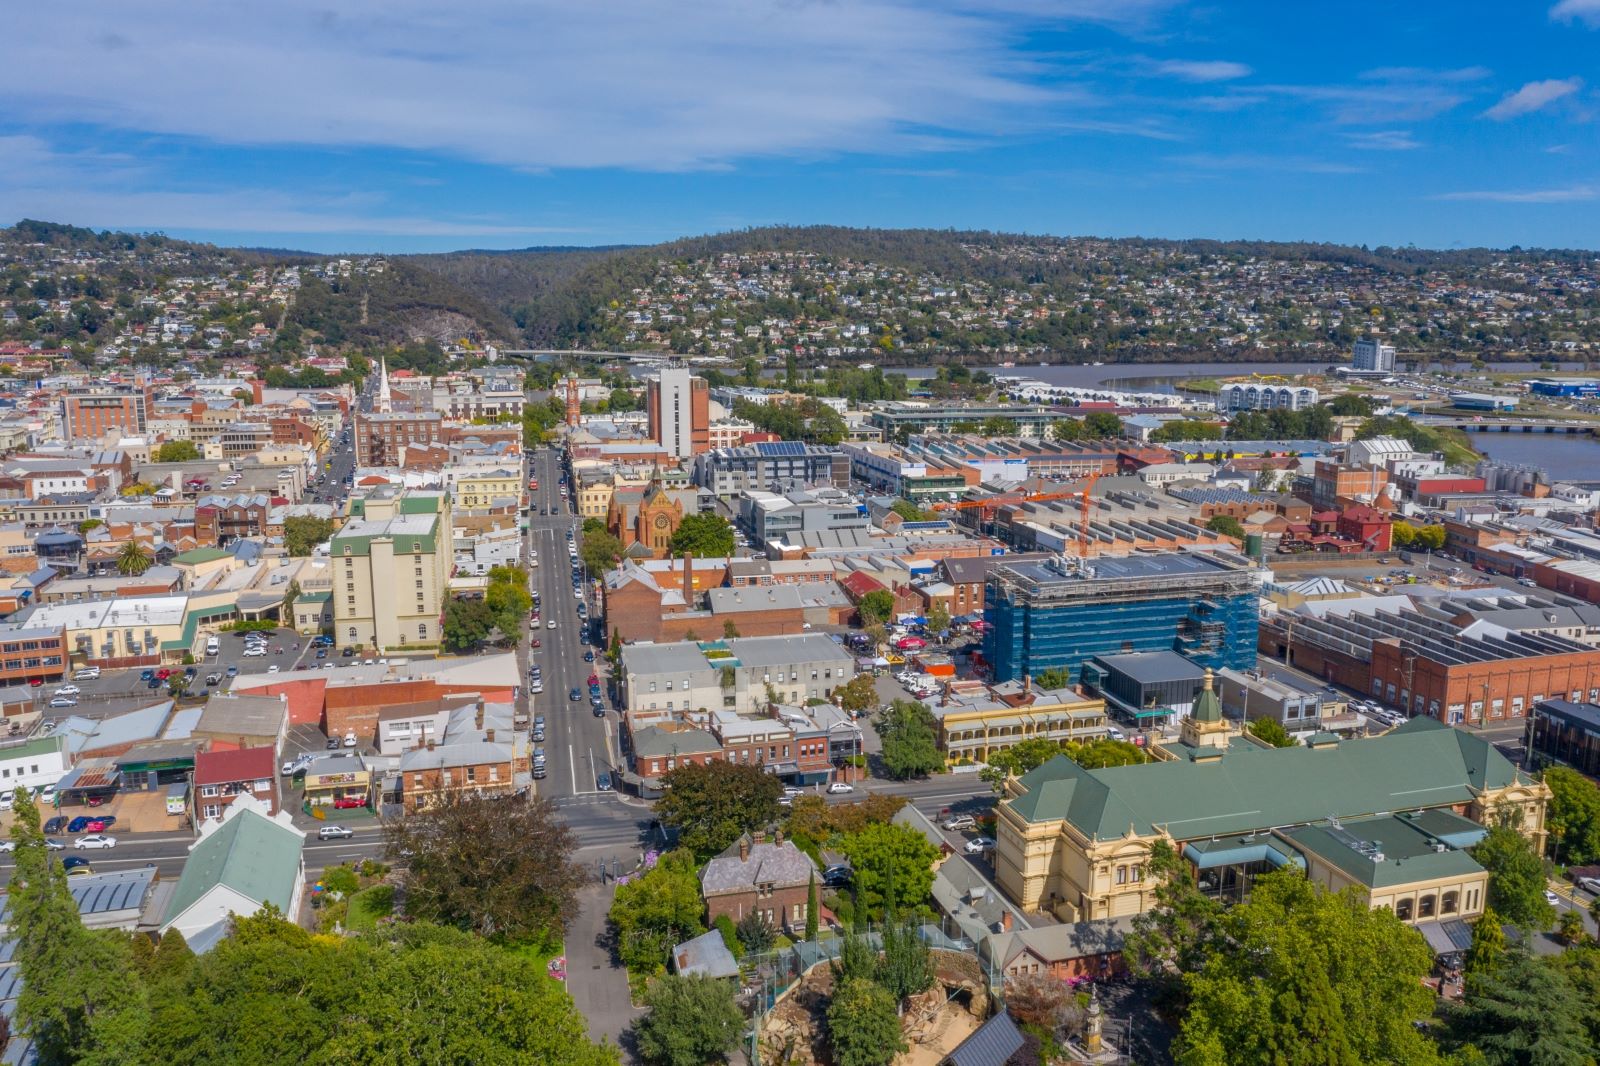 <p class="wp-caption-text">Image Credit: Shutterstock / trabantos</p>  <p><span>Tasmania’s whisky industry has been booming, and Launceston is a great place to start with distilleries like Launceston Distillery housed in an historic hangar.</span></p>